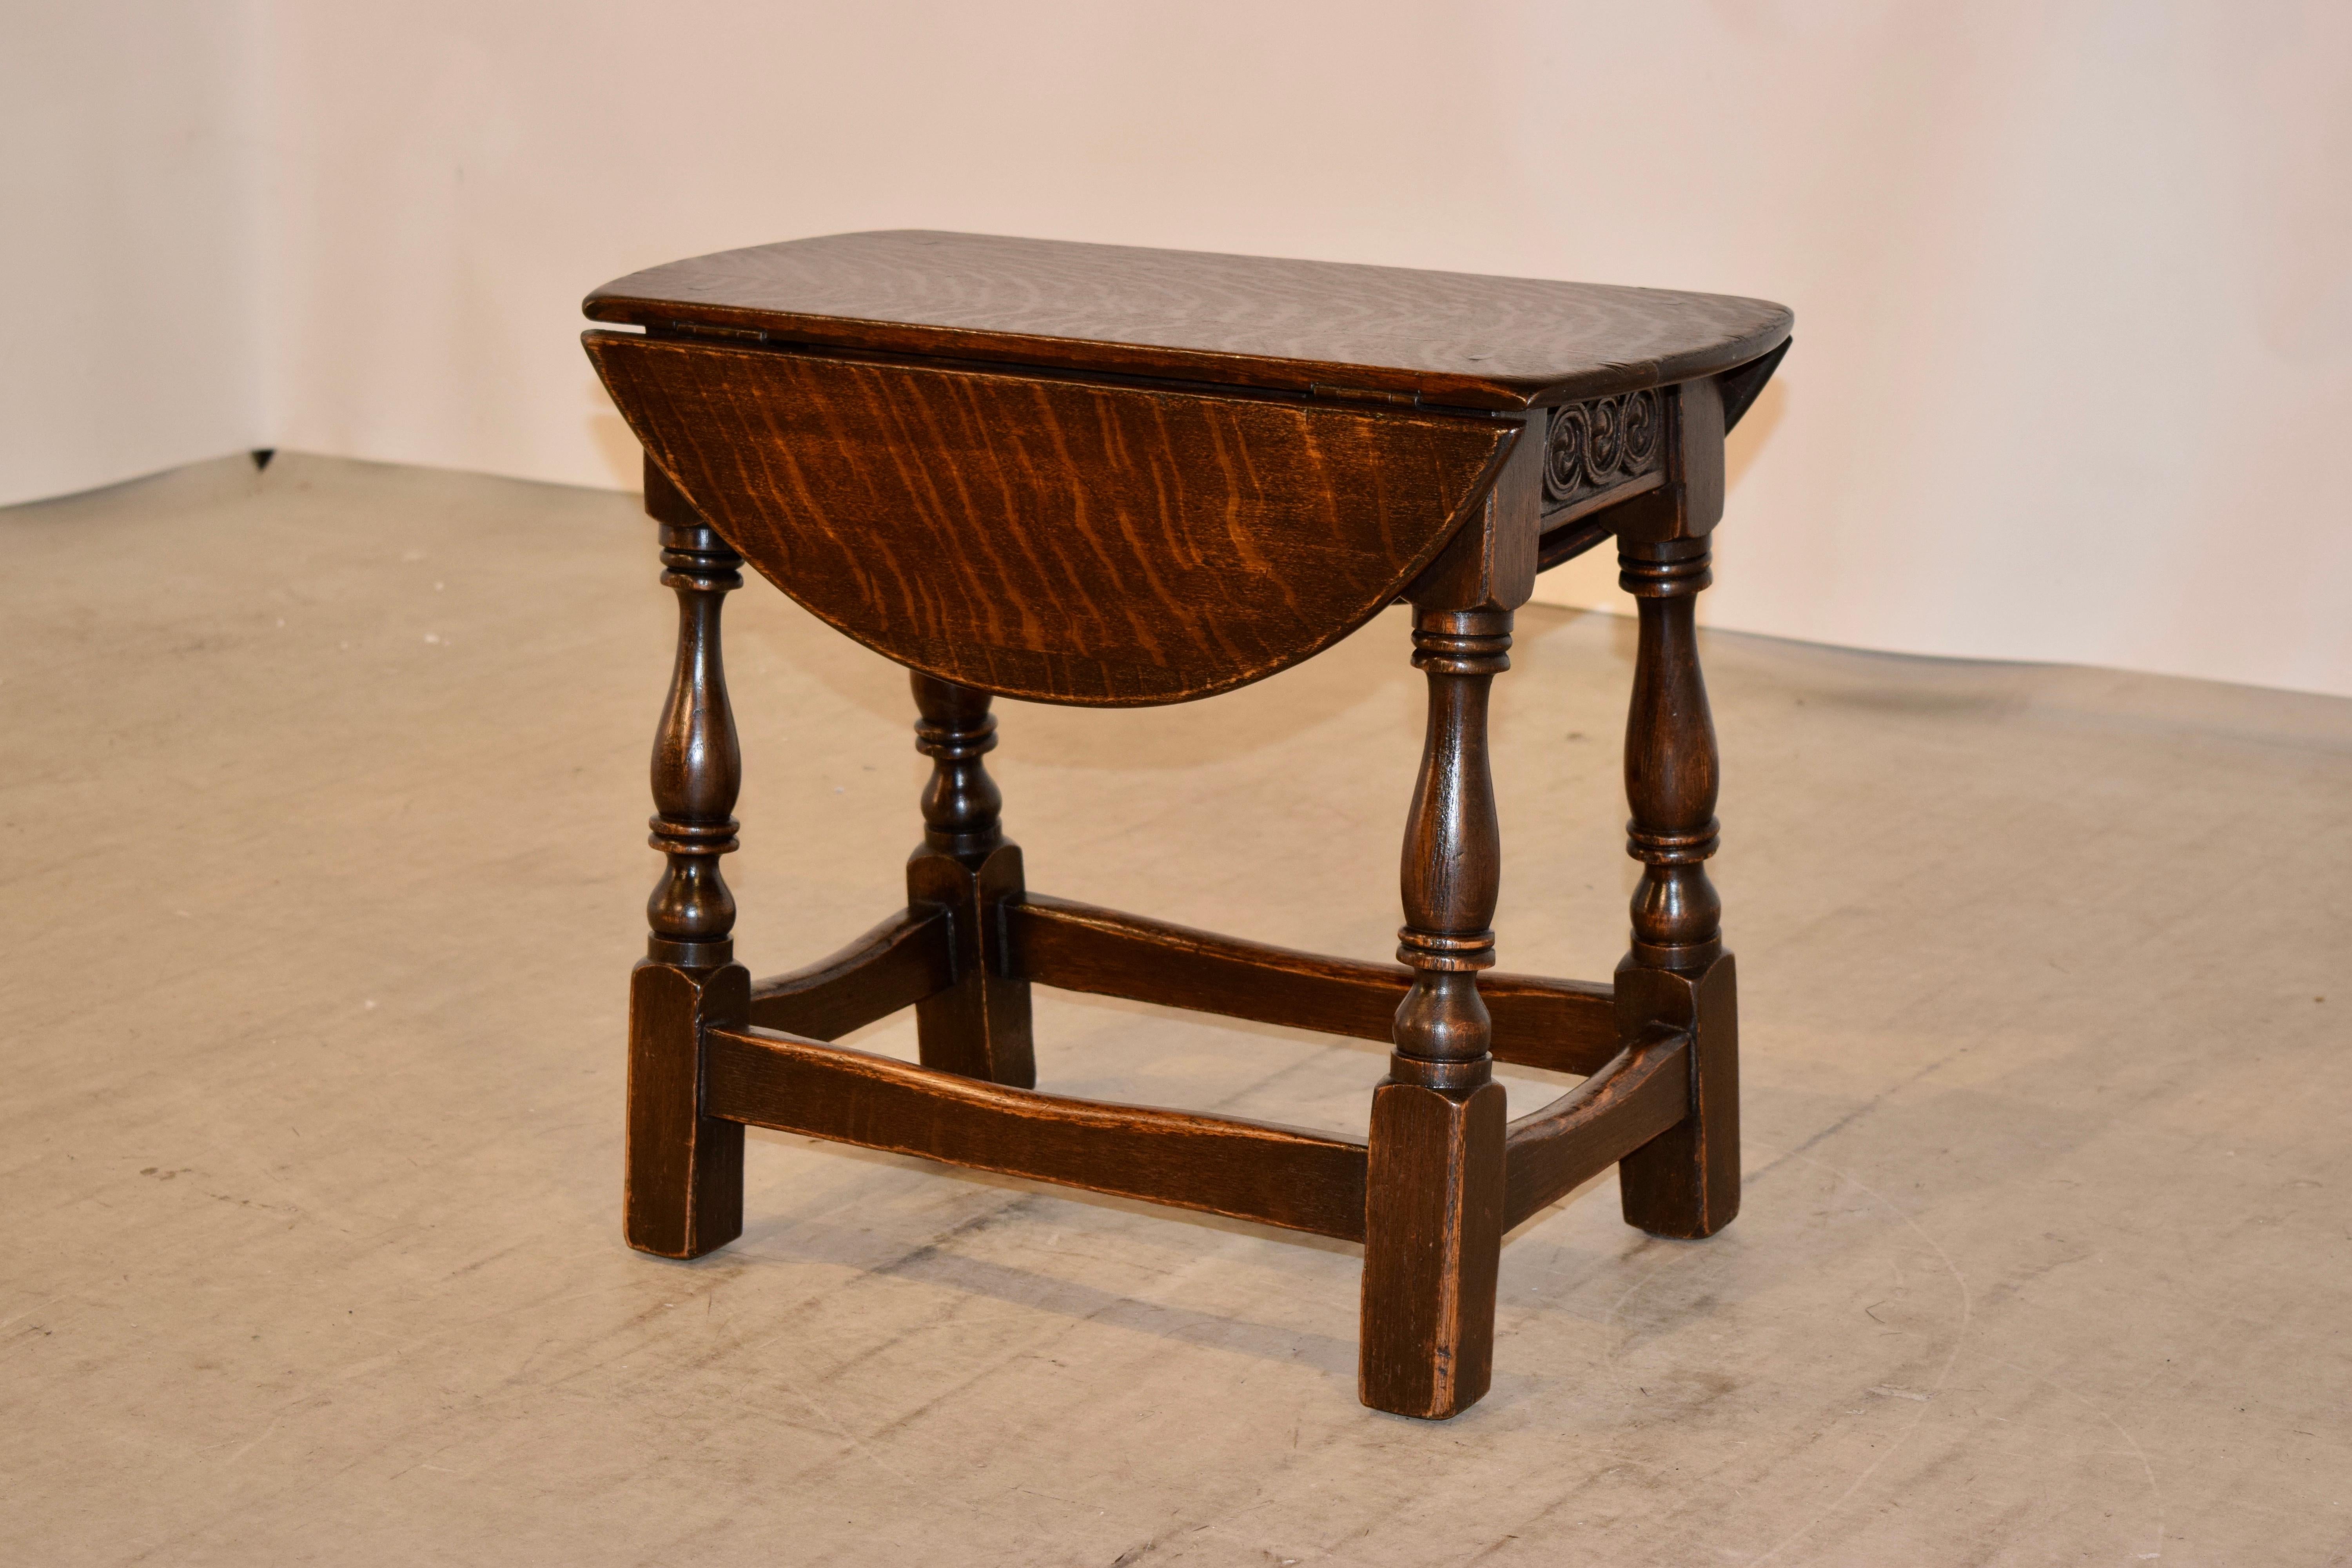 Victorian 19th Century Small Drop-Leaf Table